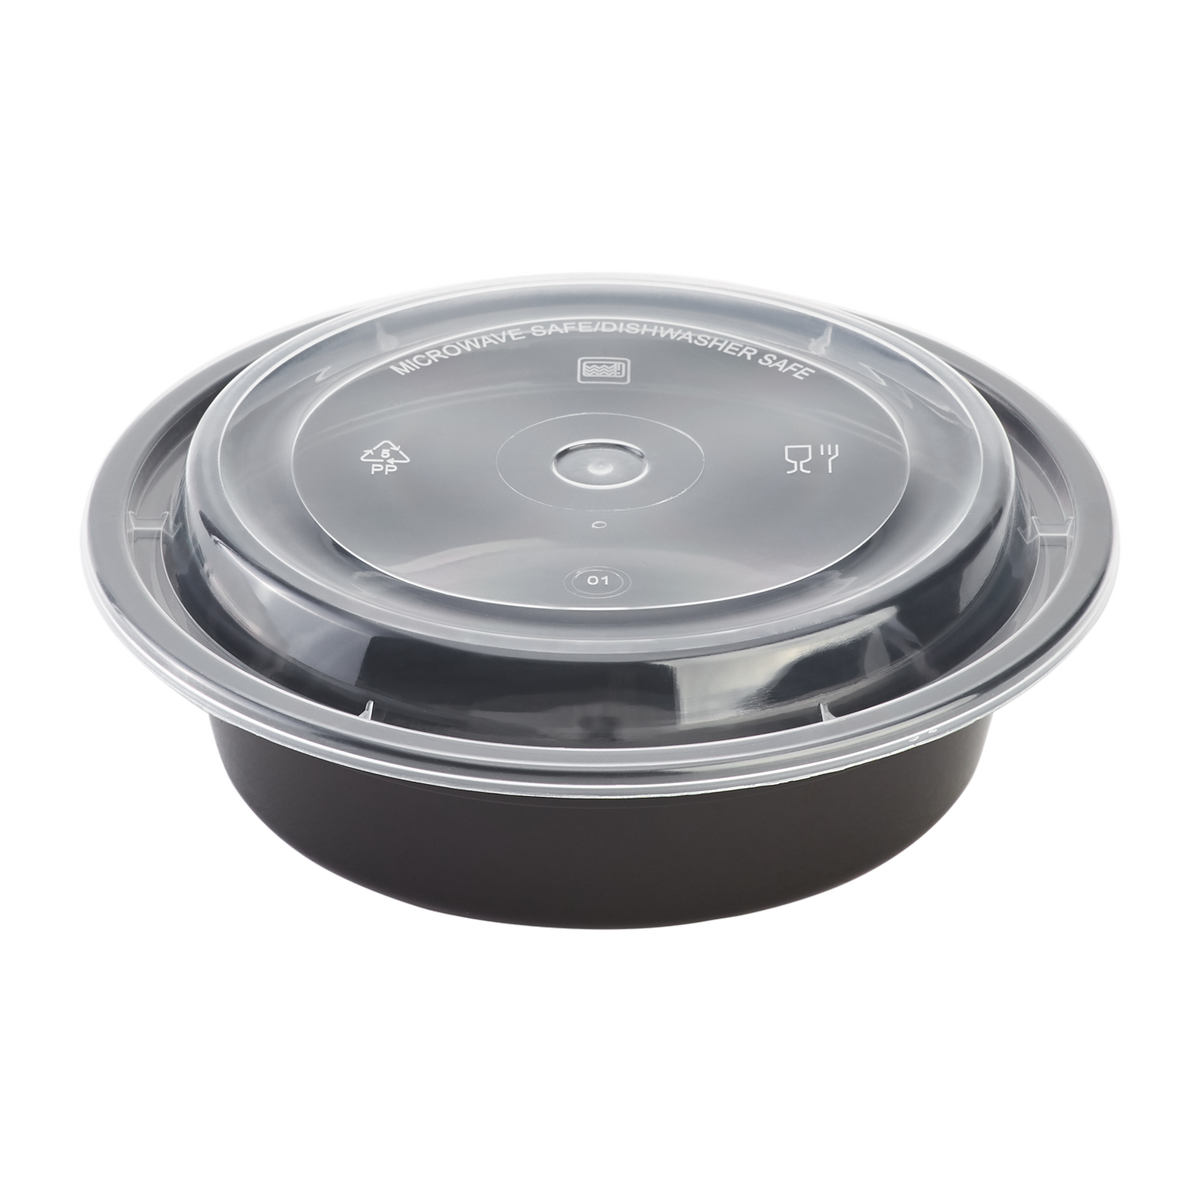 Table King 1-Pack Large Round Plastic Meal Prep Containers with Lids,  Reusable Food Storage Containe…See more Table King 1-Pack Large Round  Plastic